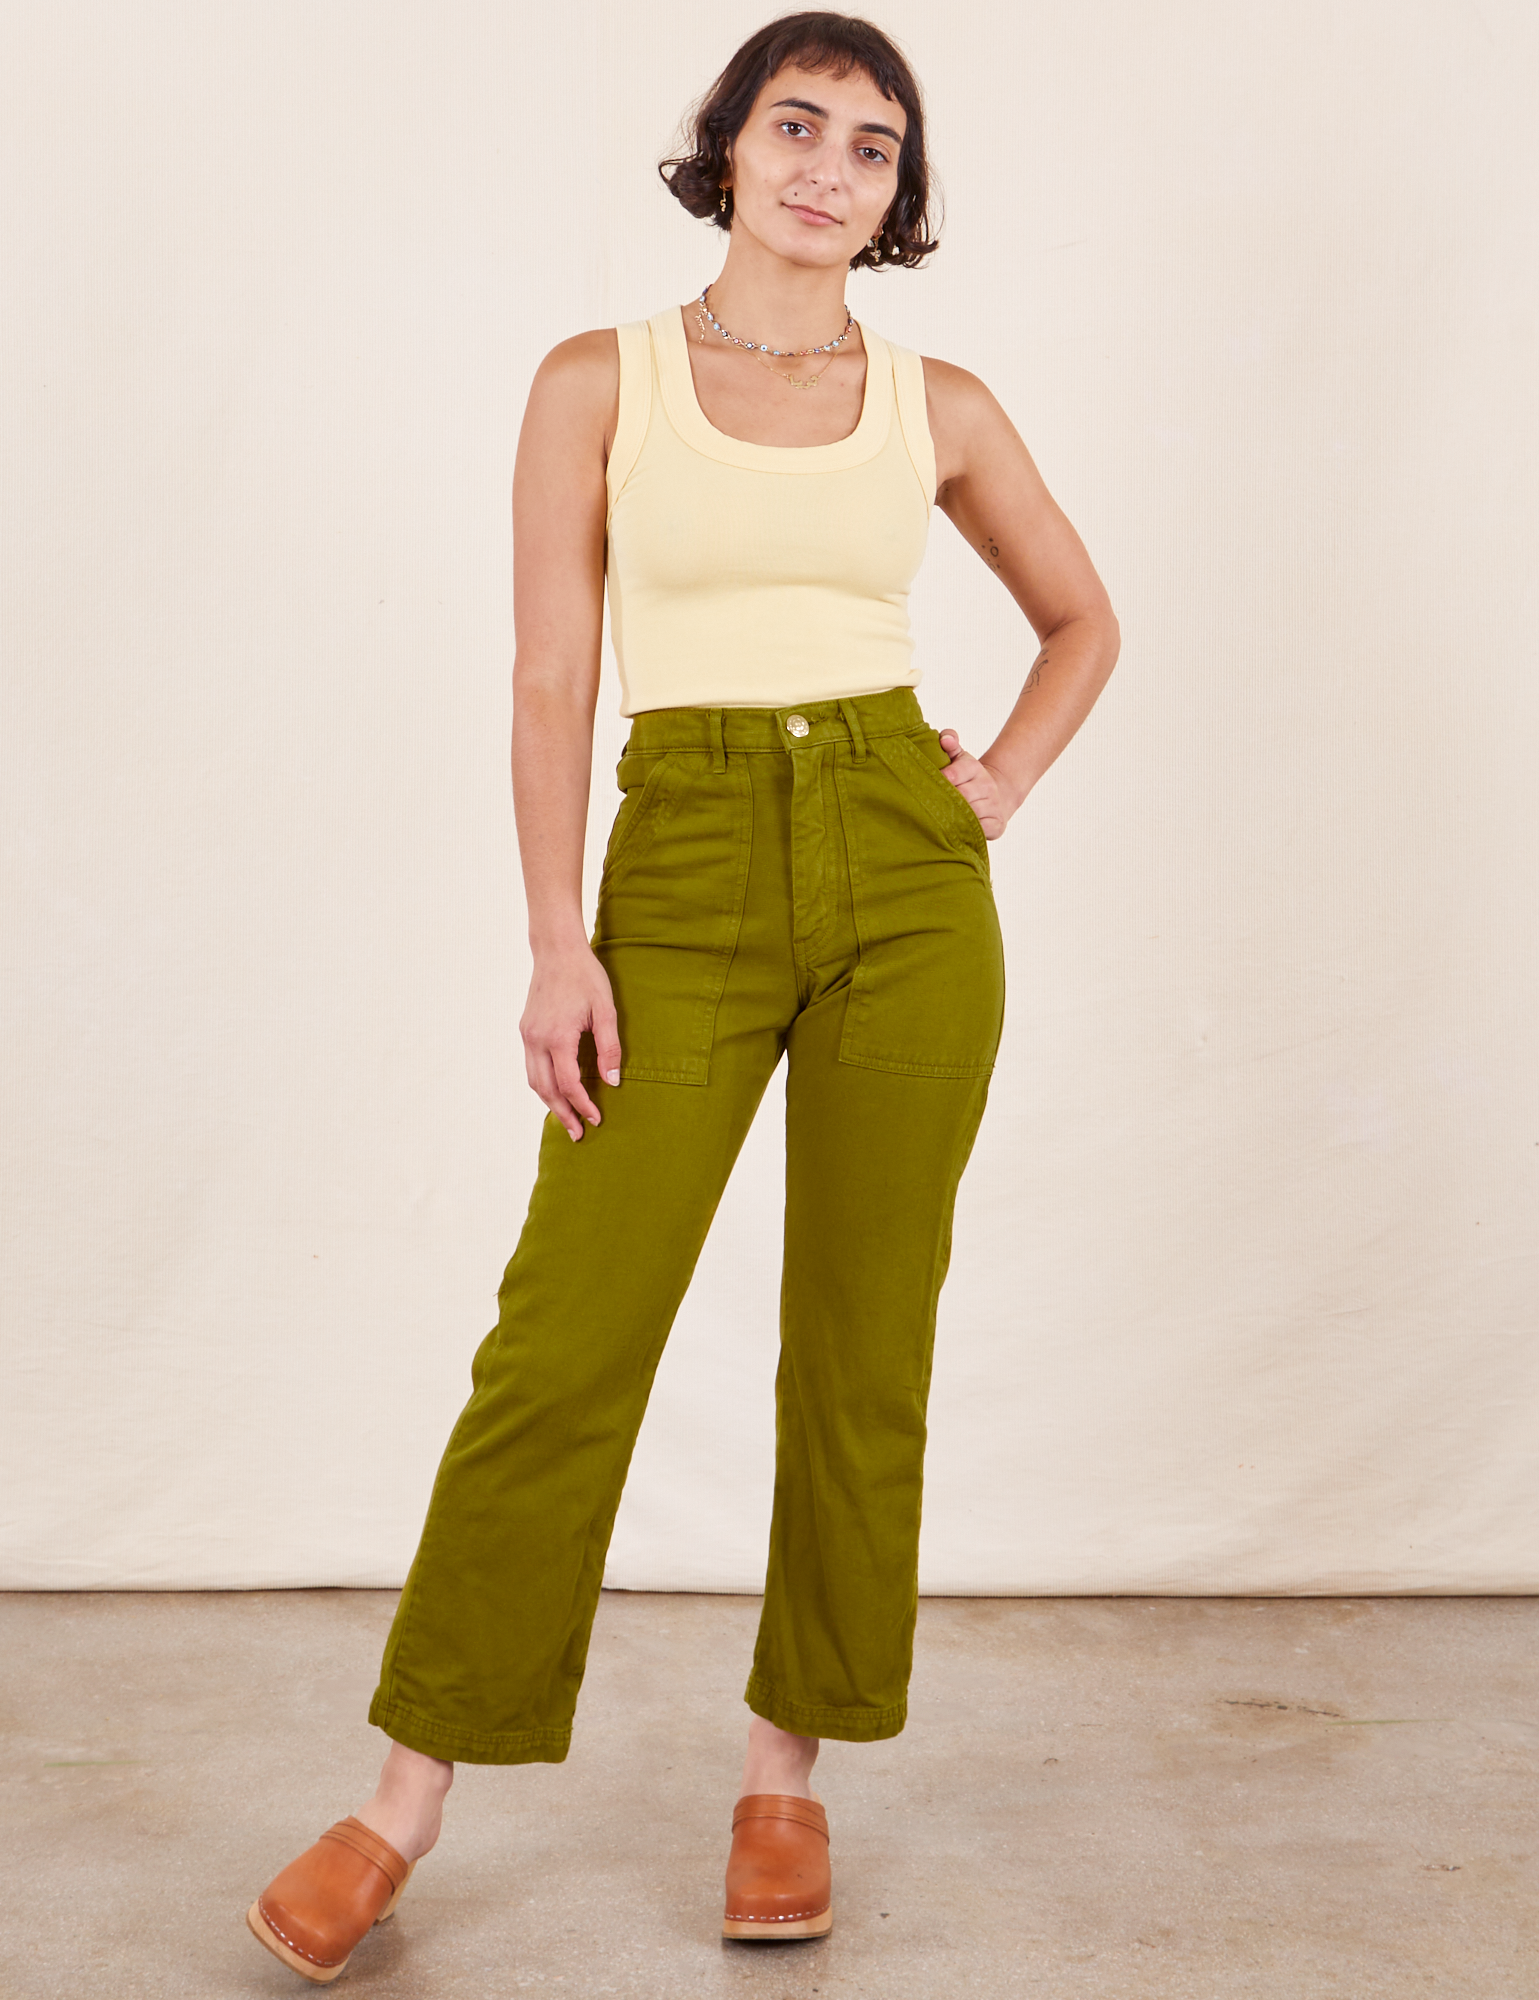 Soraya is 5&#39;2&quot; and wearing Petite XXS Work Pants in Olive Green paired with butter yellow Tank Top